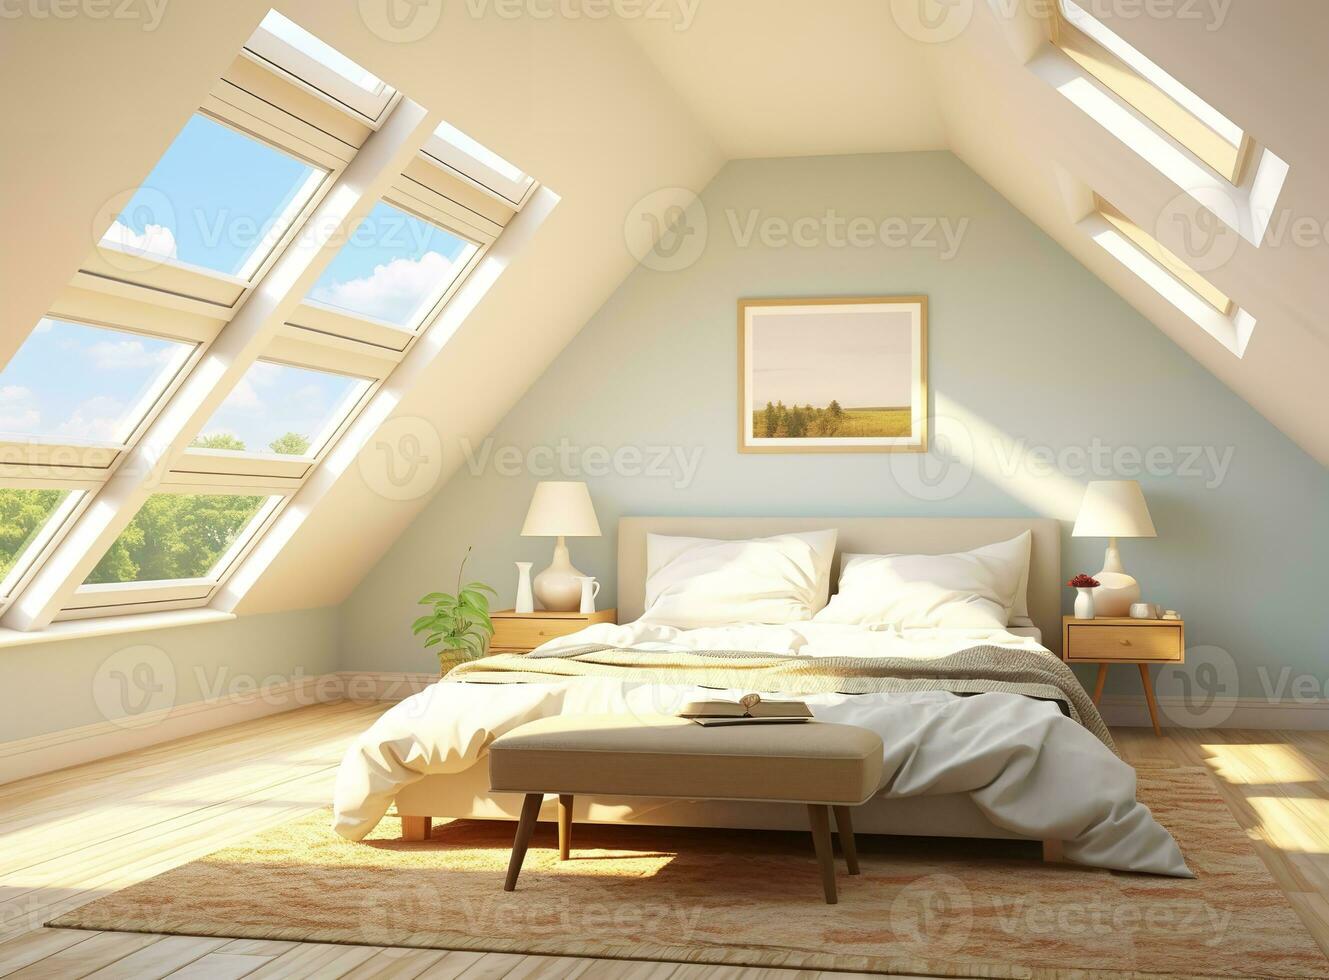 AI generated Cozy attic bedroom with bed, lamps, skylights, and a picture on the wall. The bed is made and the skylights provide natural light, making the room feel bright and airy. photo